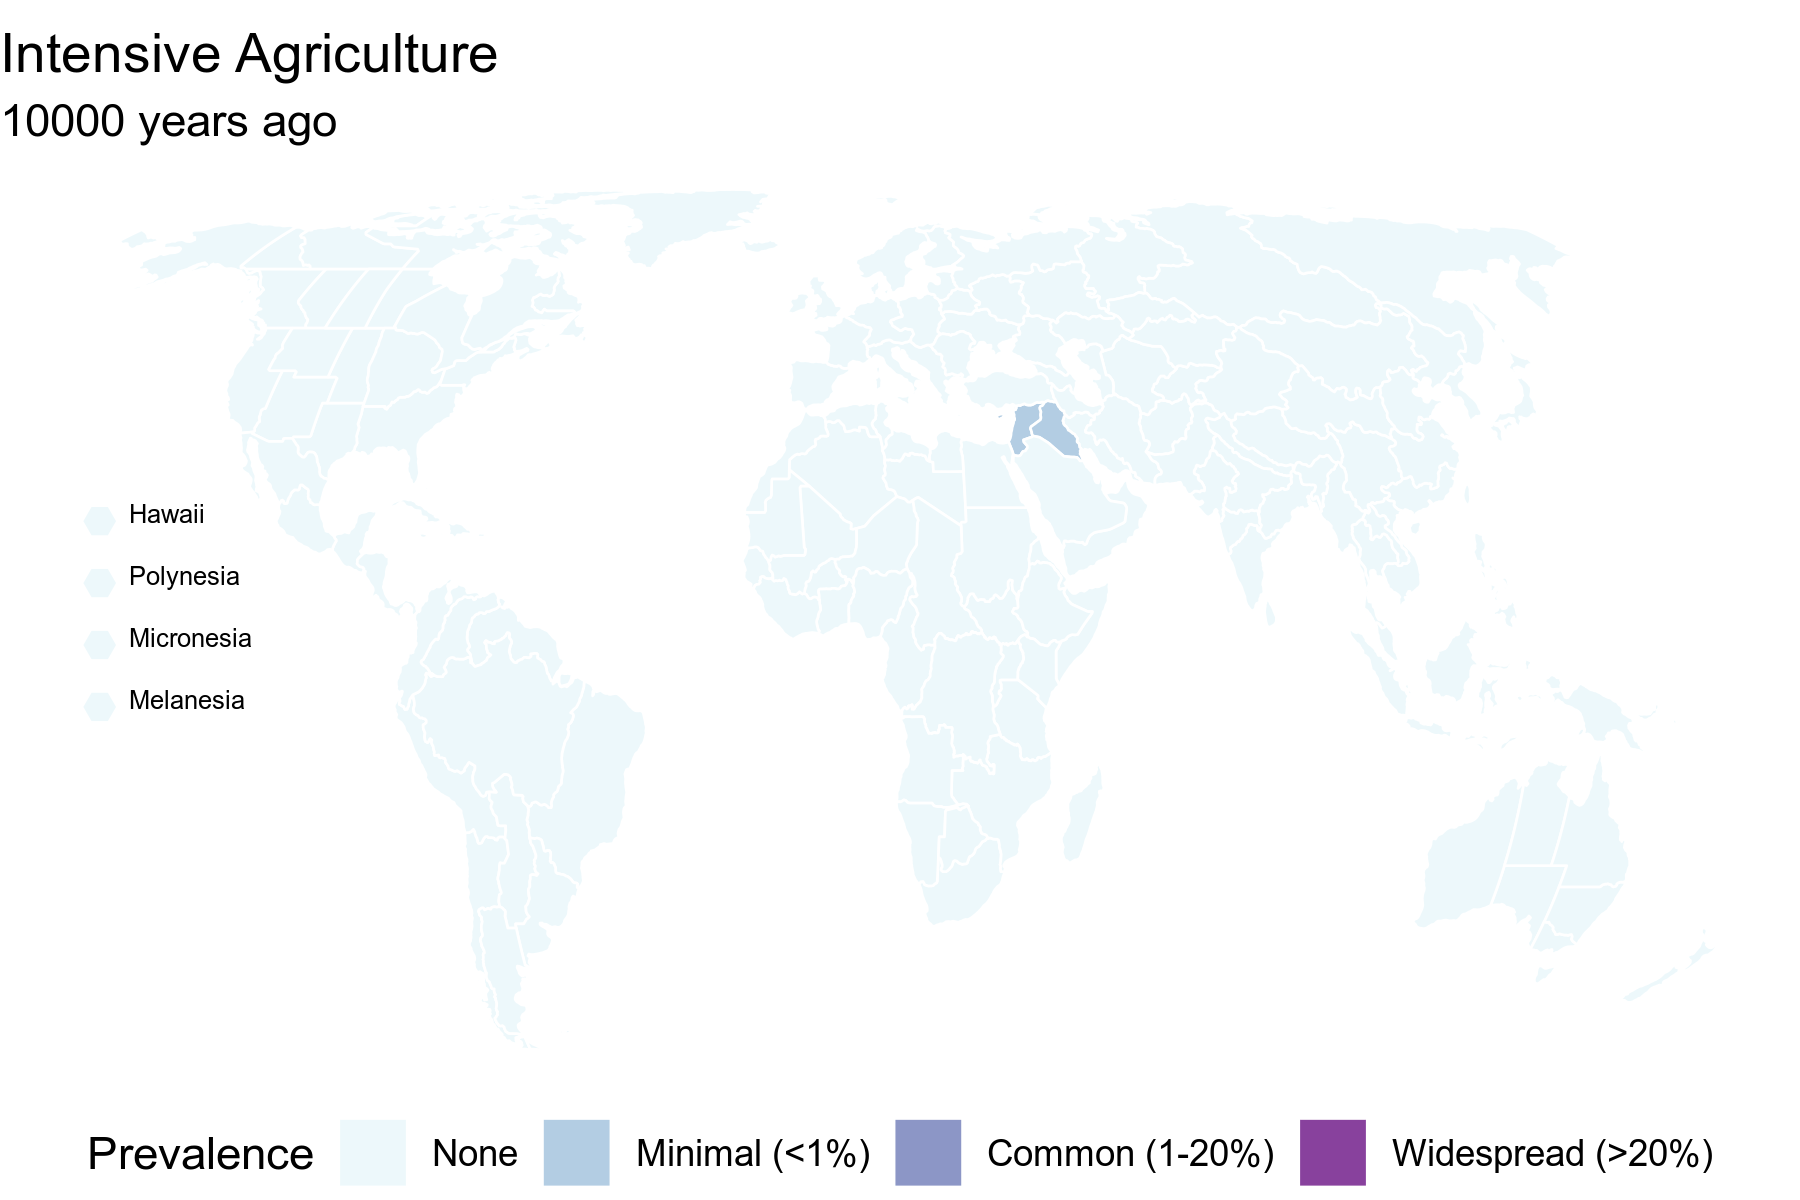 World map. Agriculture spreading from Middle East to cover nearly entire world.